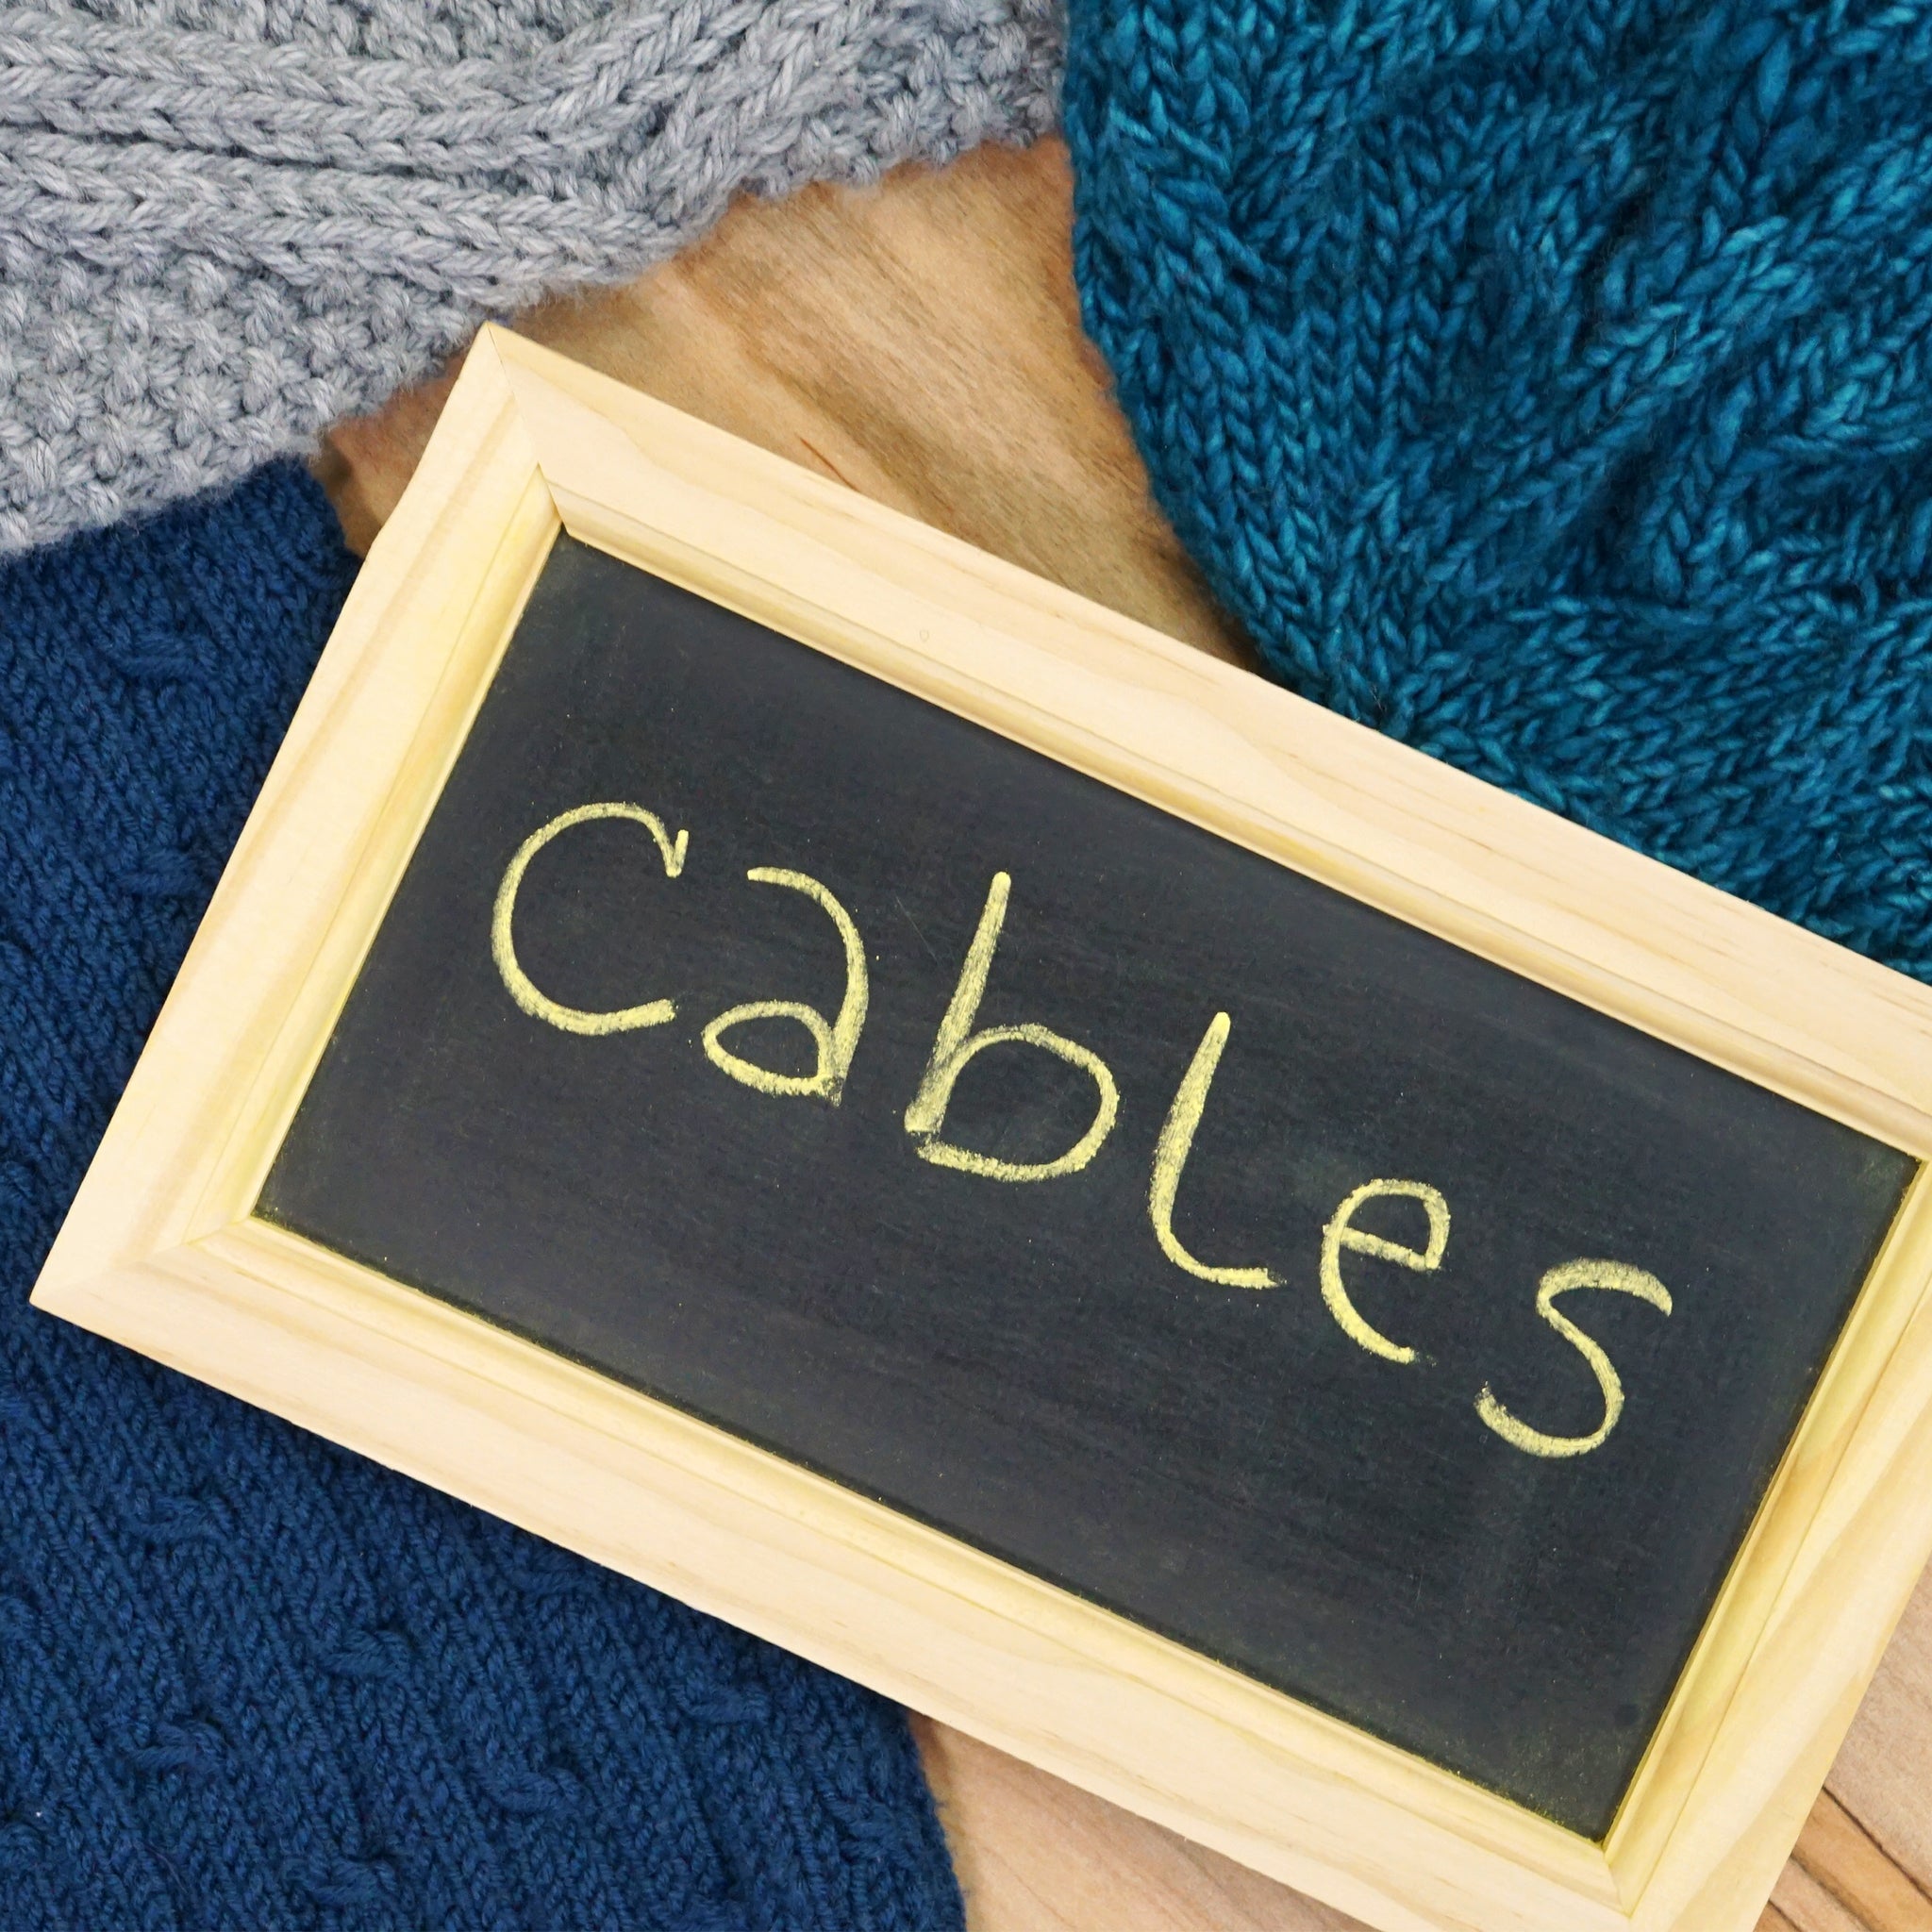 Cables Class